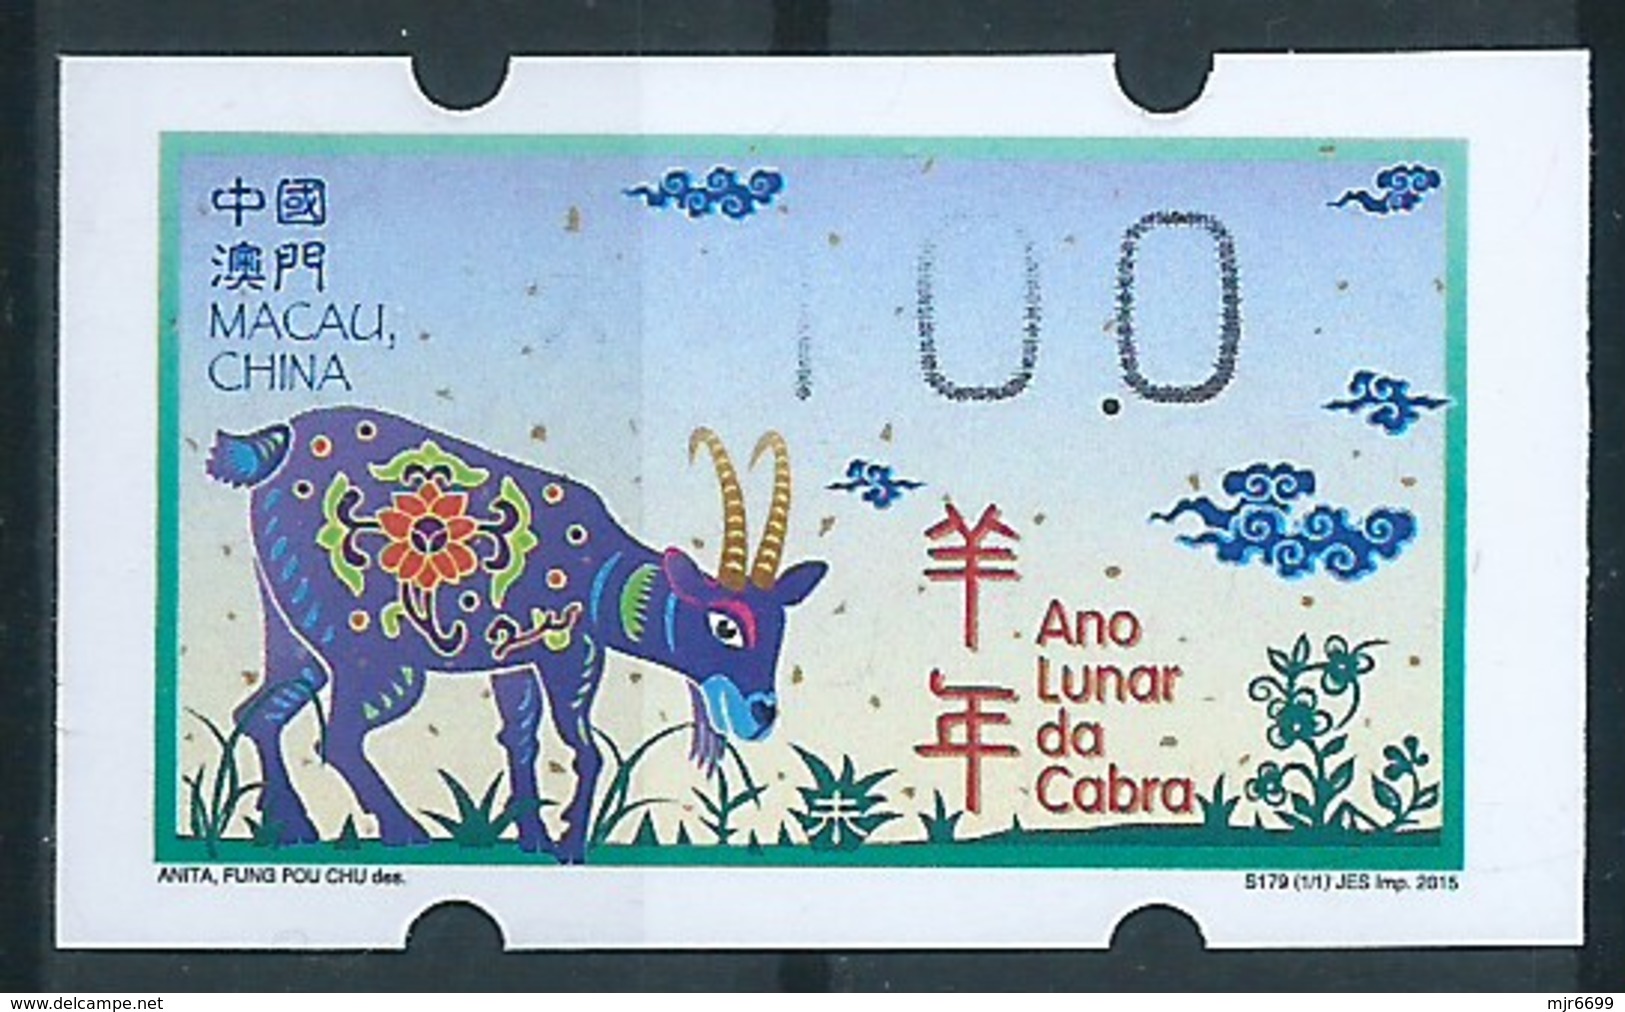 MACAU 2015 LUNAR NEW YEAR OF THE GOAT ATM LABELS ERROR PRINT - PARTLY NO INK PRINT, ALMOST MISSING '1' & "STARS" - Distributors